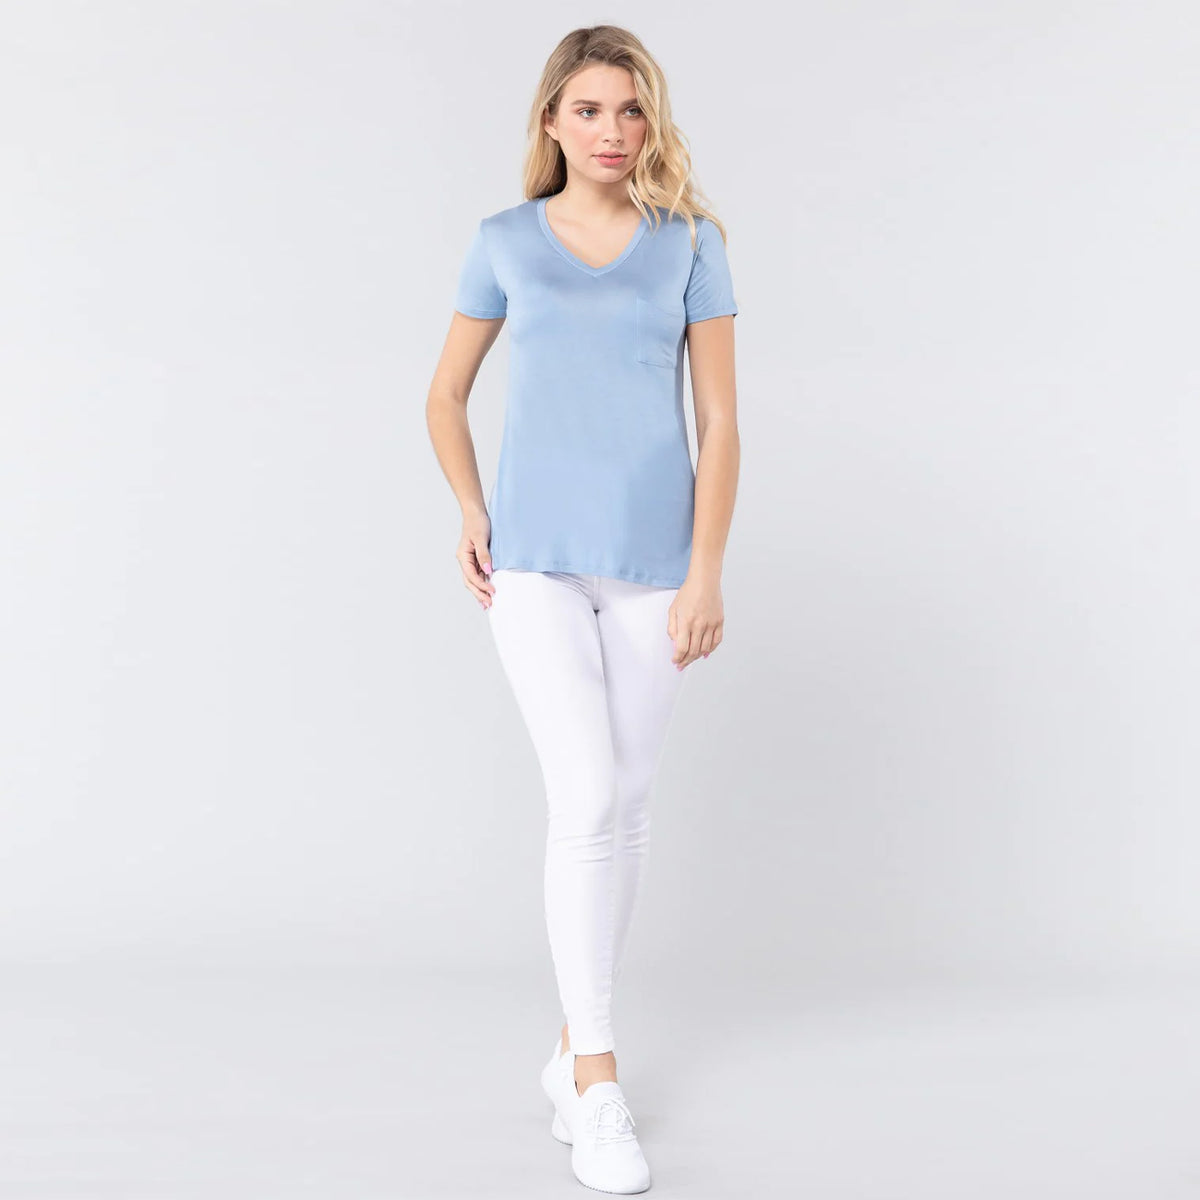 Ice Blue V-Neck Rayon Women's Jersey Top